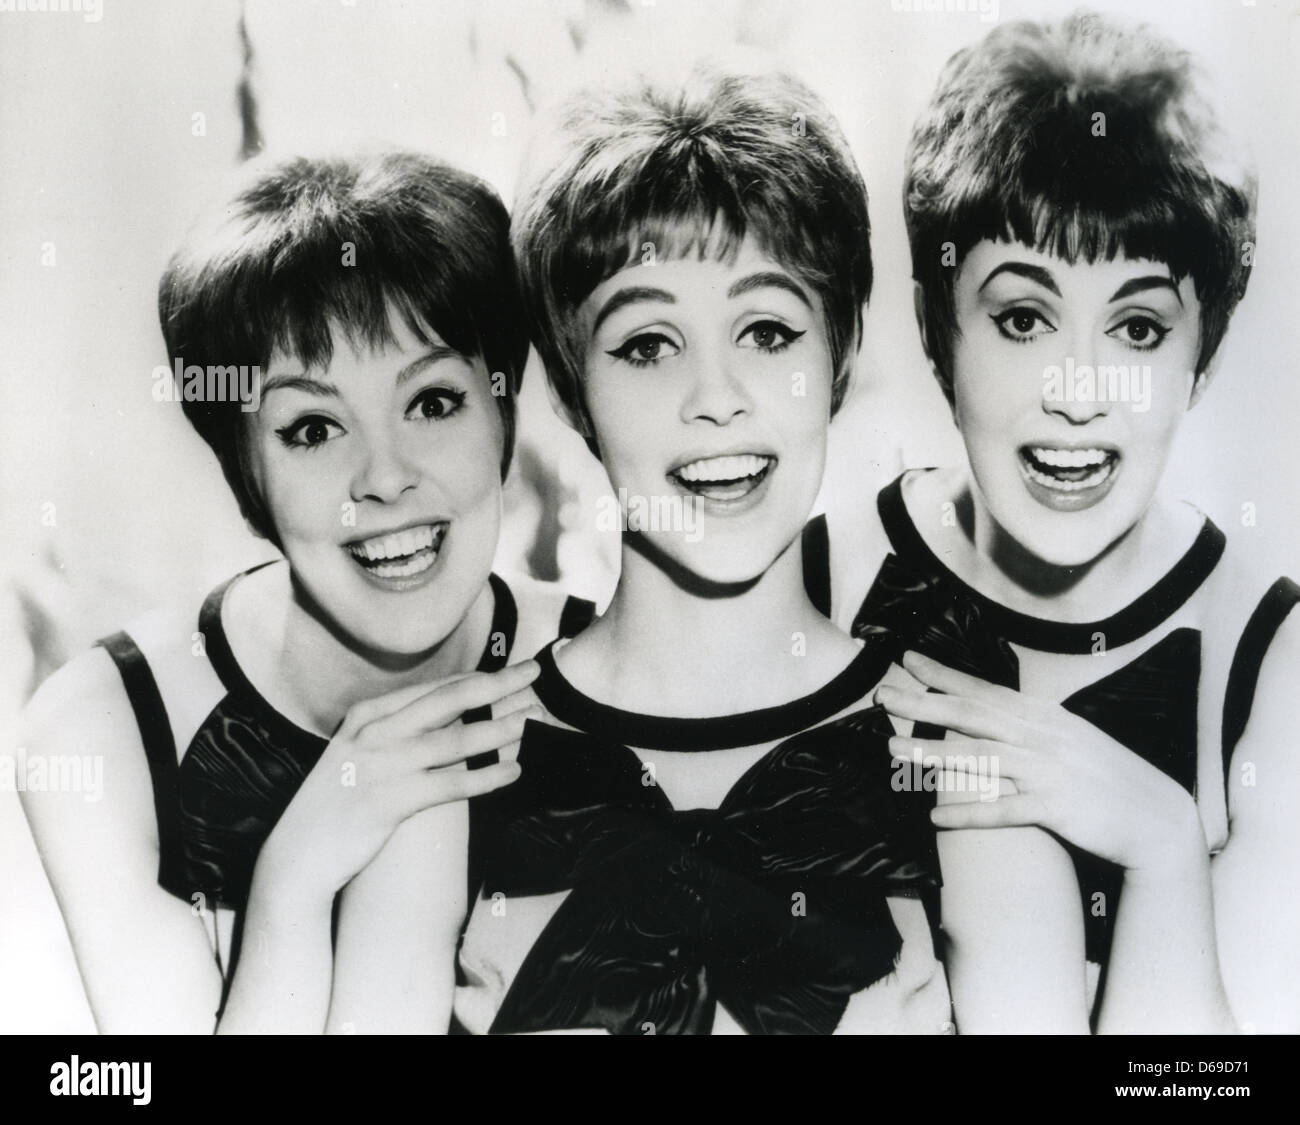 THE VERNONS GIRLS Promotional photo of UK vocal trio about 1962 after the group was slimmed down from the original fifties group Stock Photo